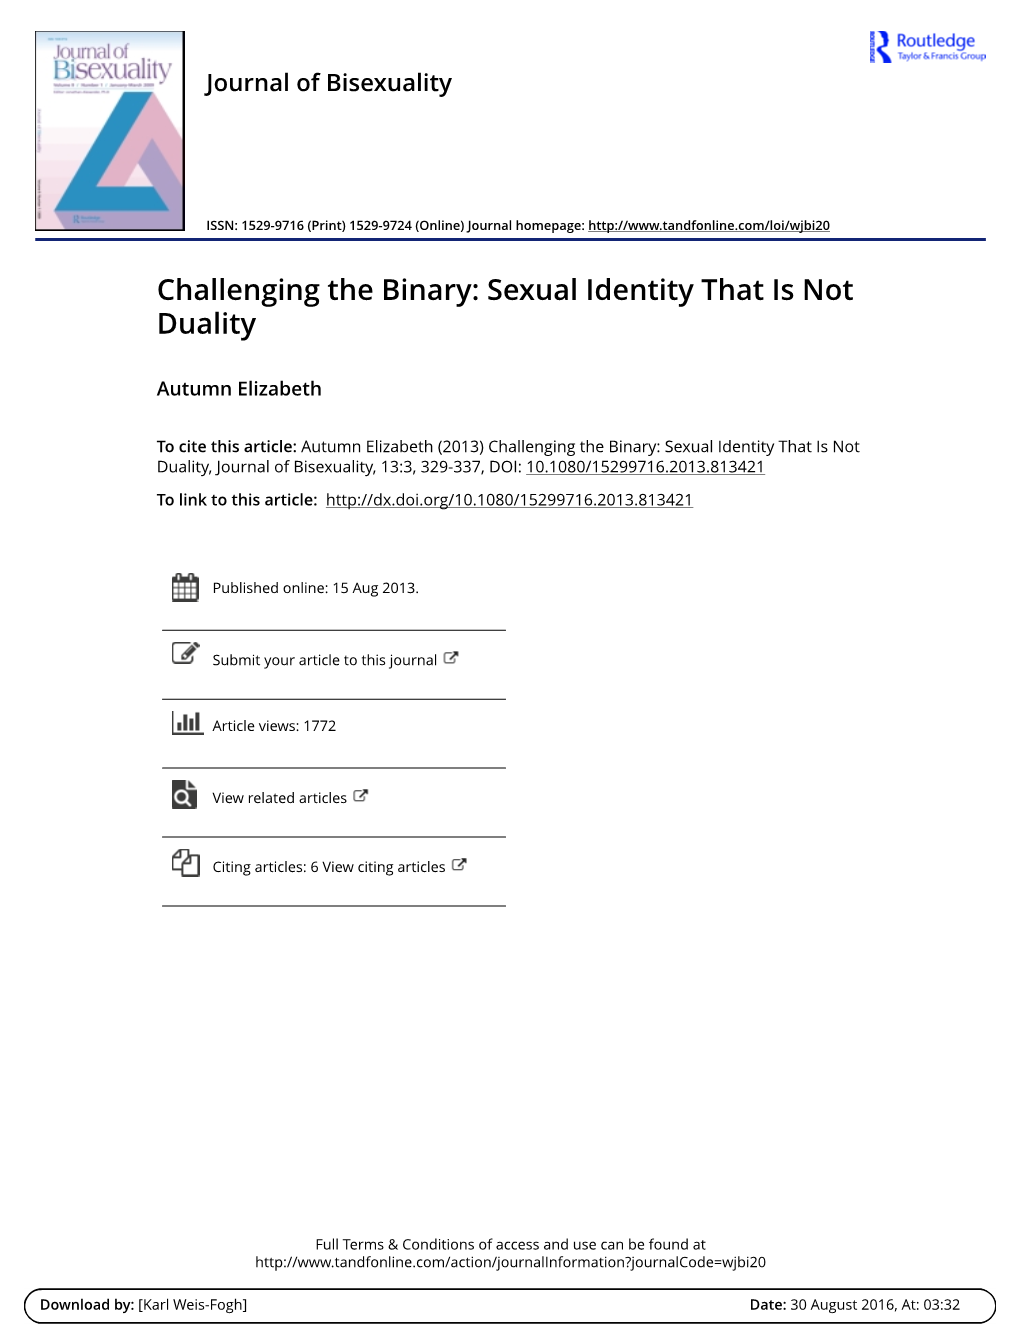 Challenging the Binary: Sexual Identity That Is Not Duality